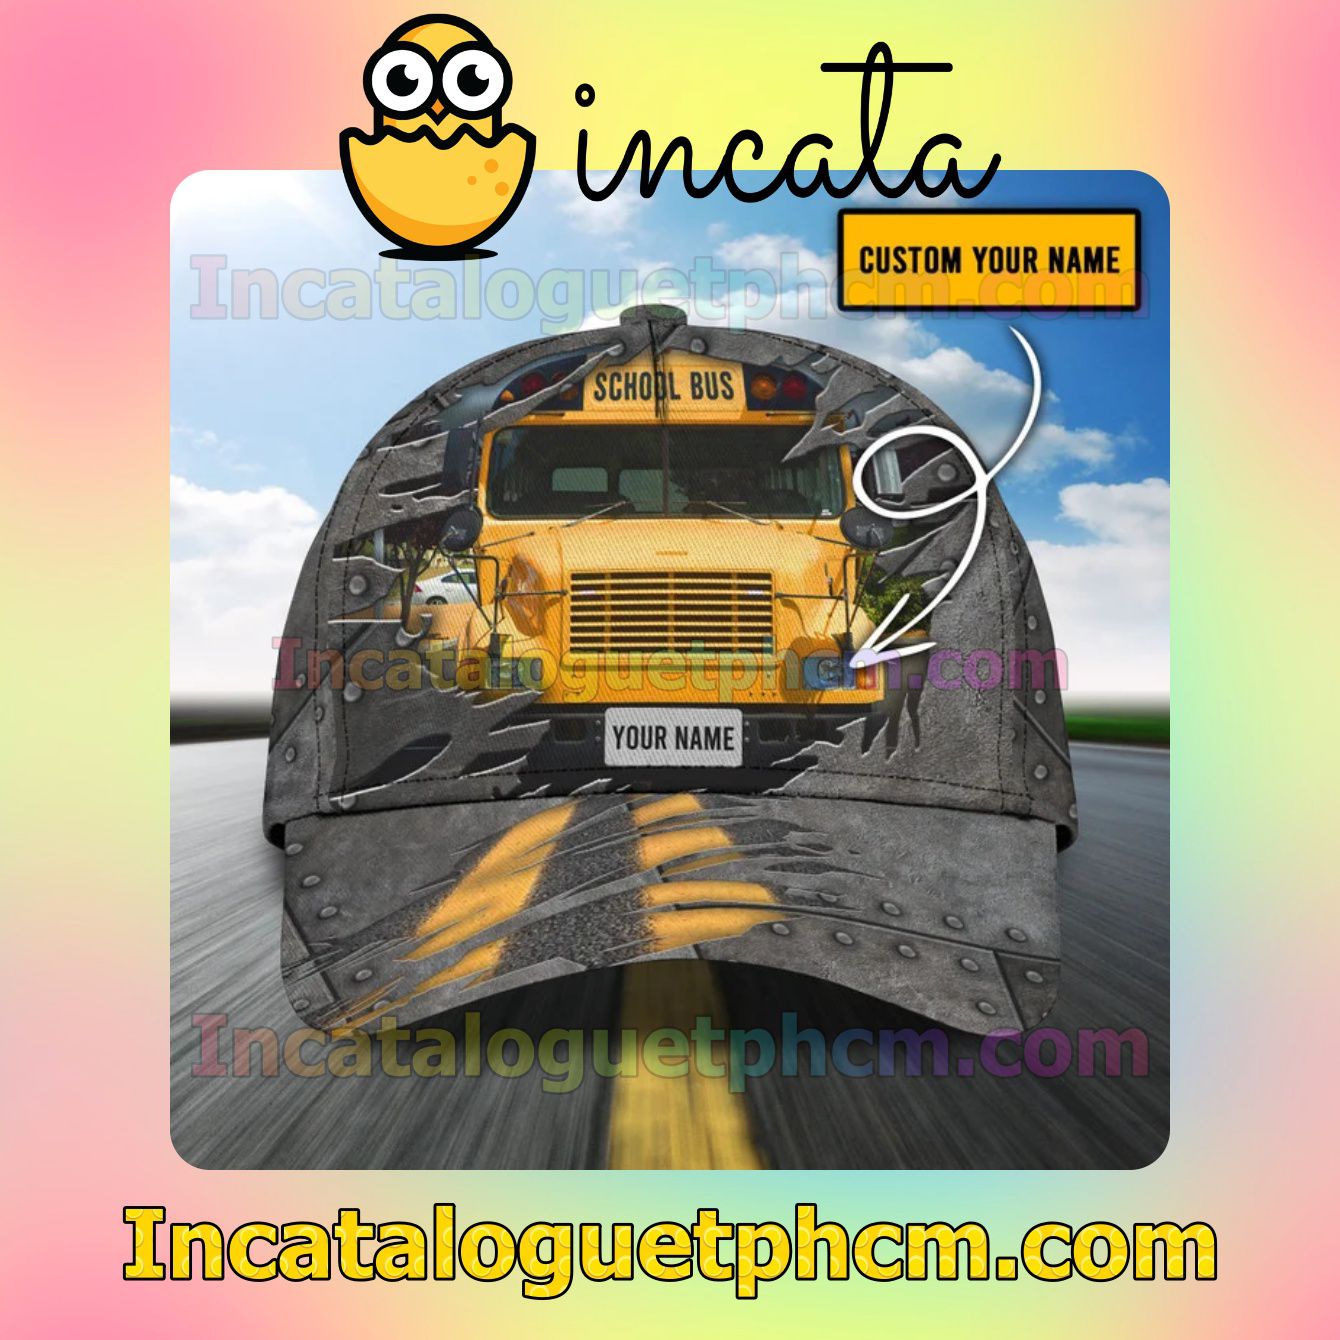 Sale Off Personalized School Bus Torn Ripped Classic Hat Caps Gift For Men